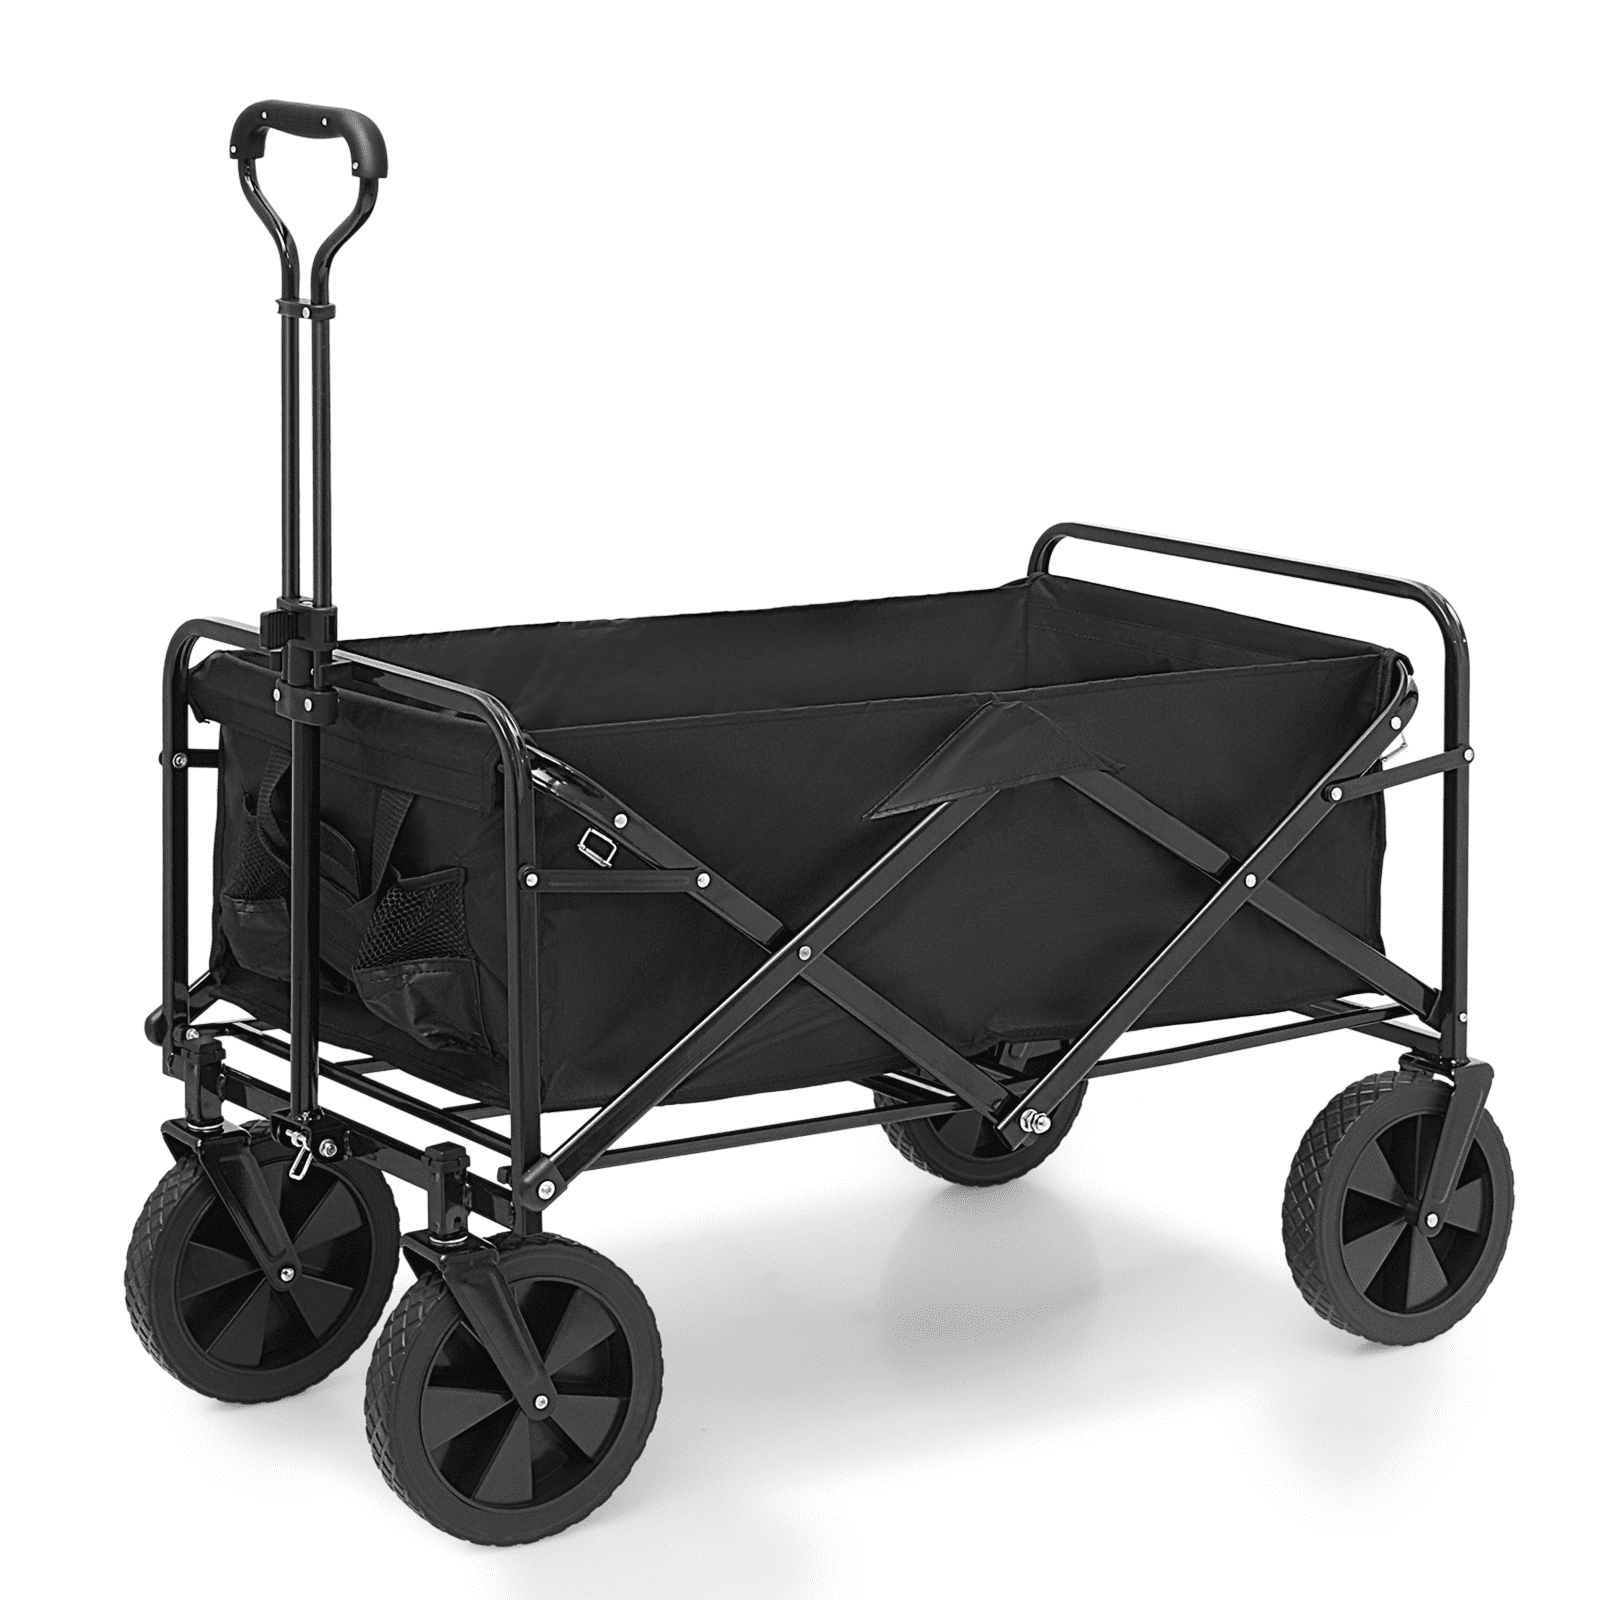 MADOG Collapsible Folding Wagon with Drink Holders, Heavy Duty Foldable  Outdoor Utility Wagon Cart with 360° Rotation Wheels, Utility Grocery Wagon  for Camping Shopping, Black